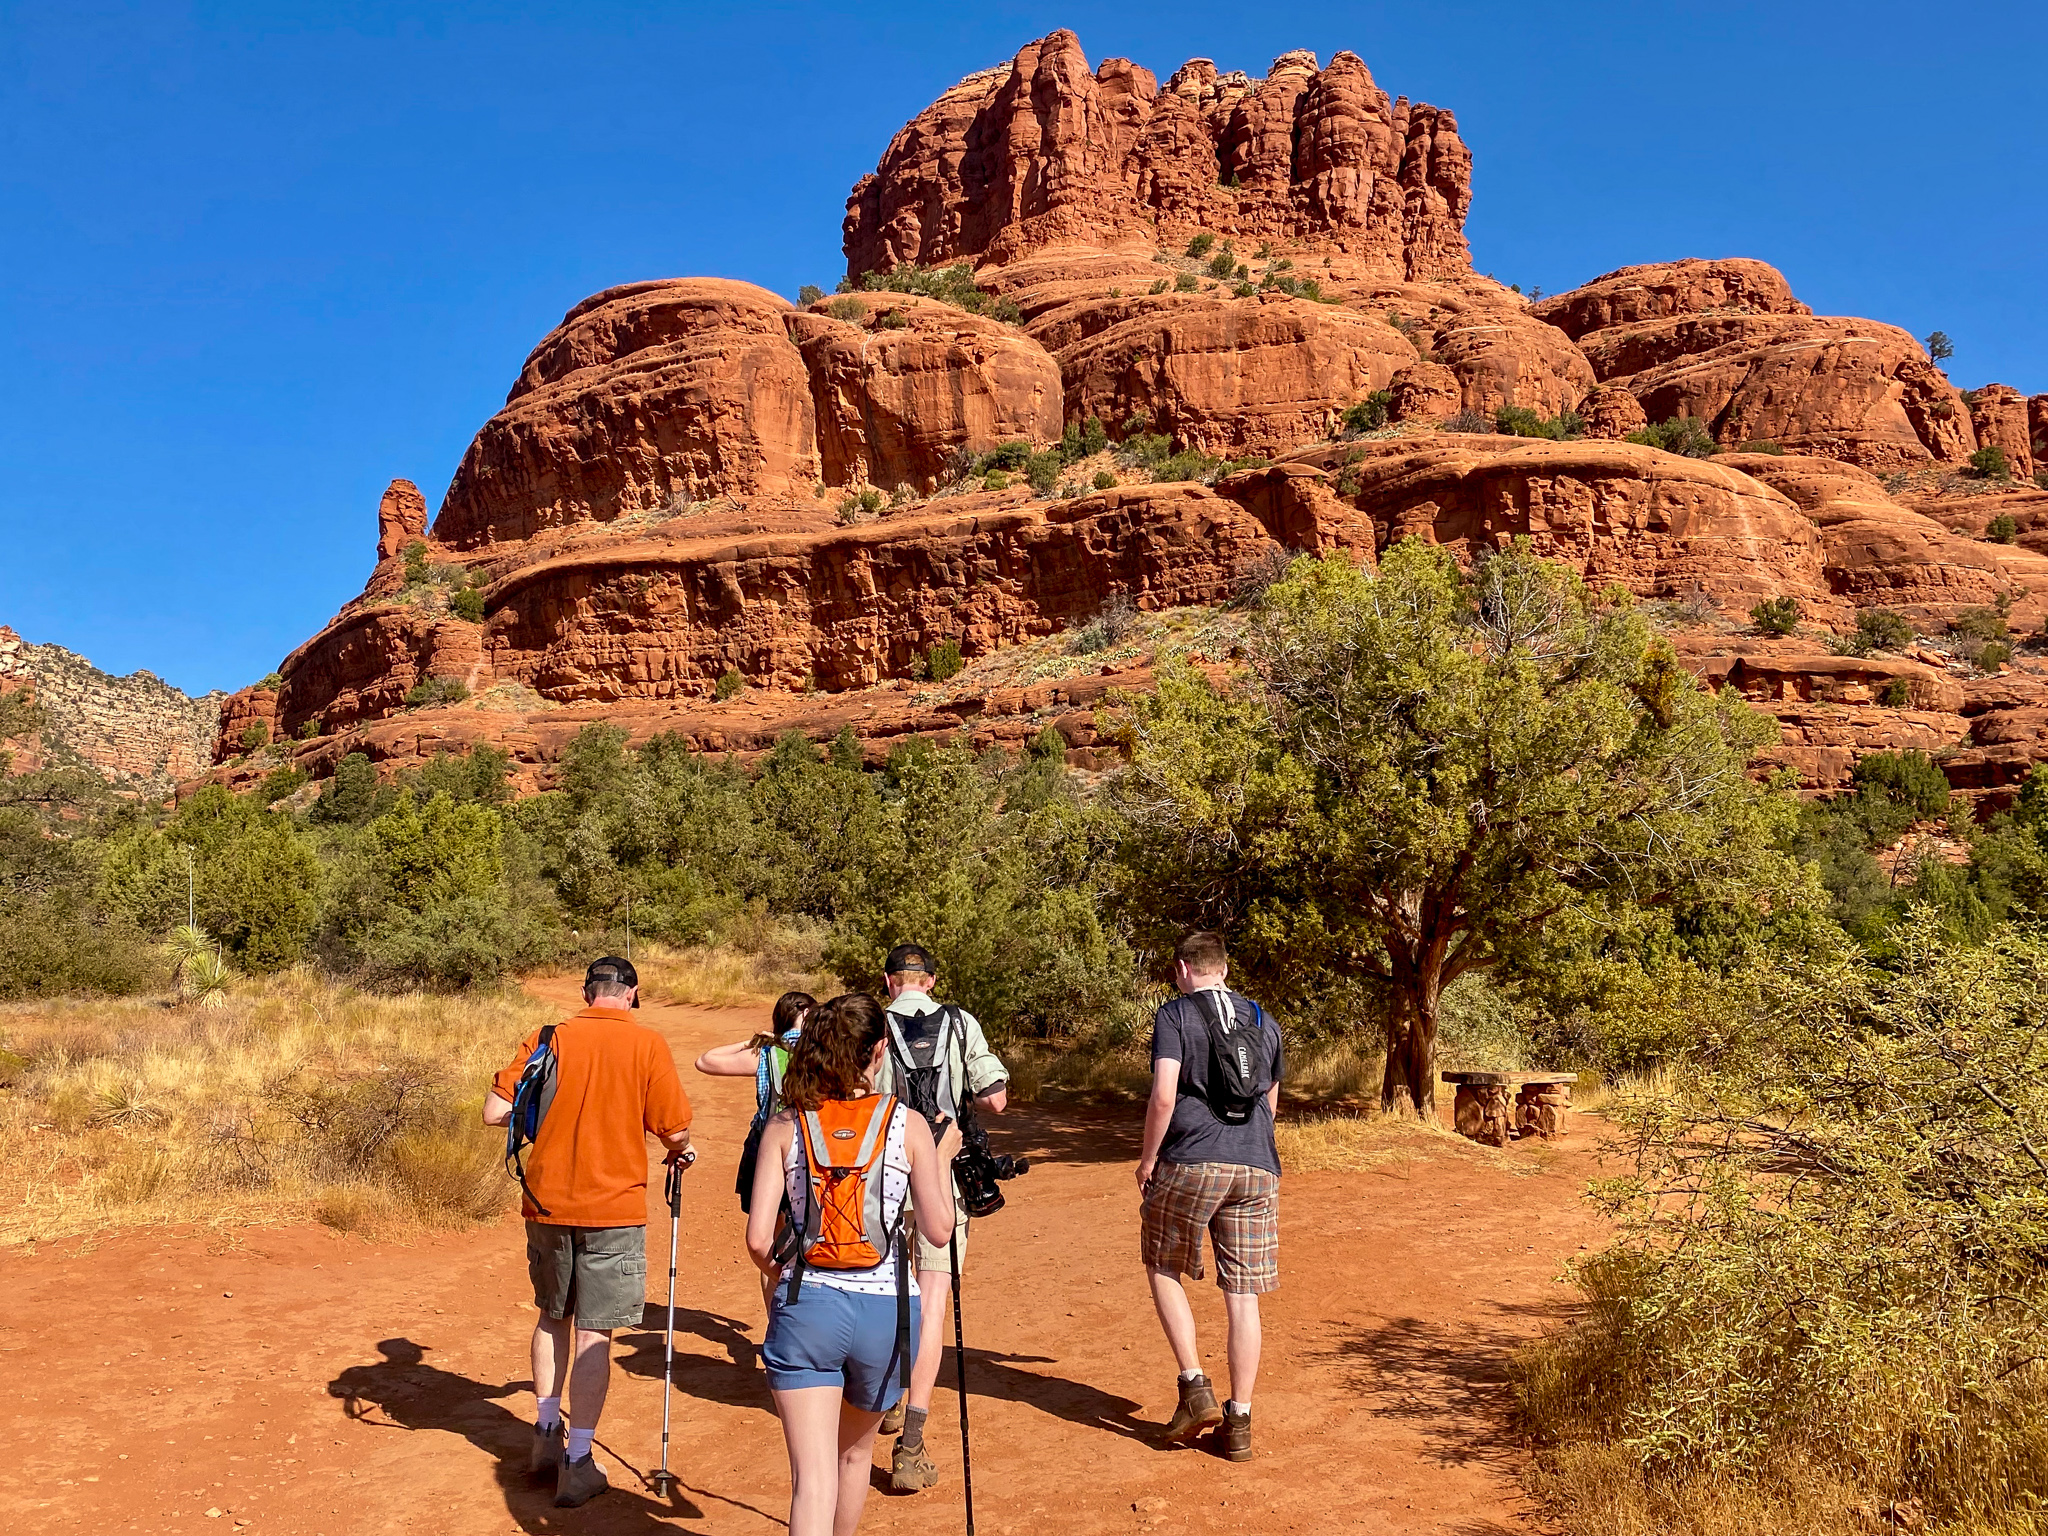 Hiking Bell Rock was an exceptional choice for our last day in Sedona